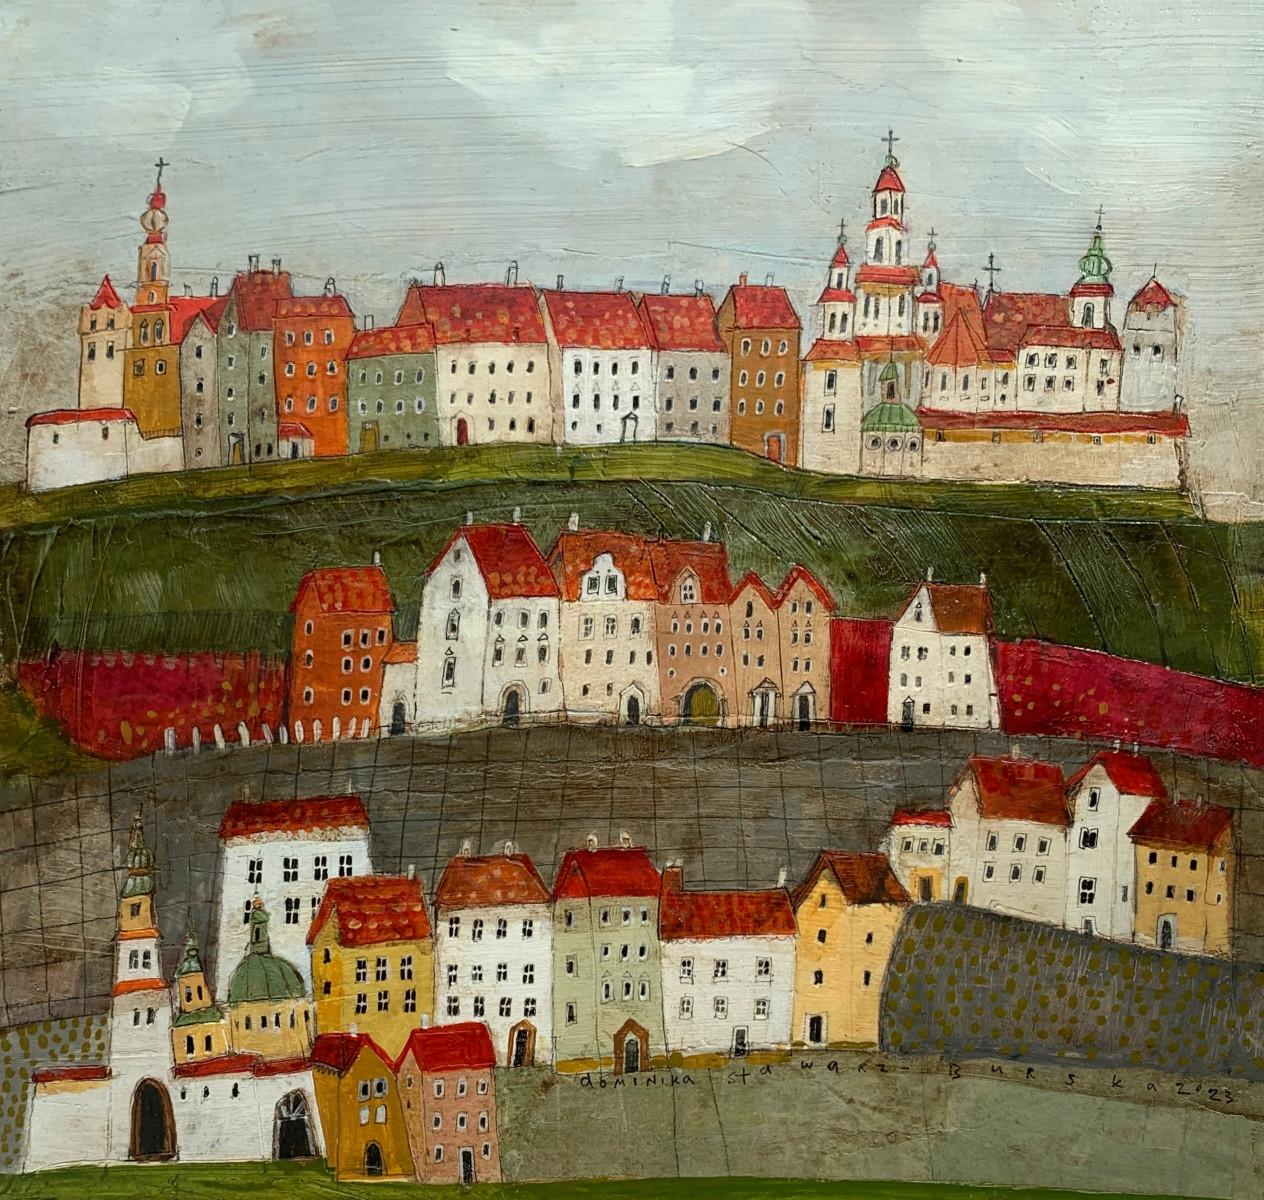 Contemporary figurative mixed media on cardboard painting by Polish artist Dominika Stawarz-Burska. Artwork has characteristical glossy finish to it which resembles surface of ceramic tile. Composition depicts view on an imaginary town. Colors used